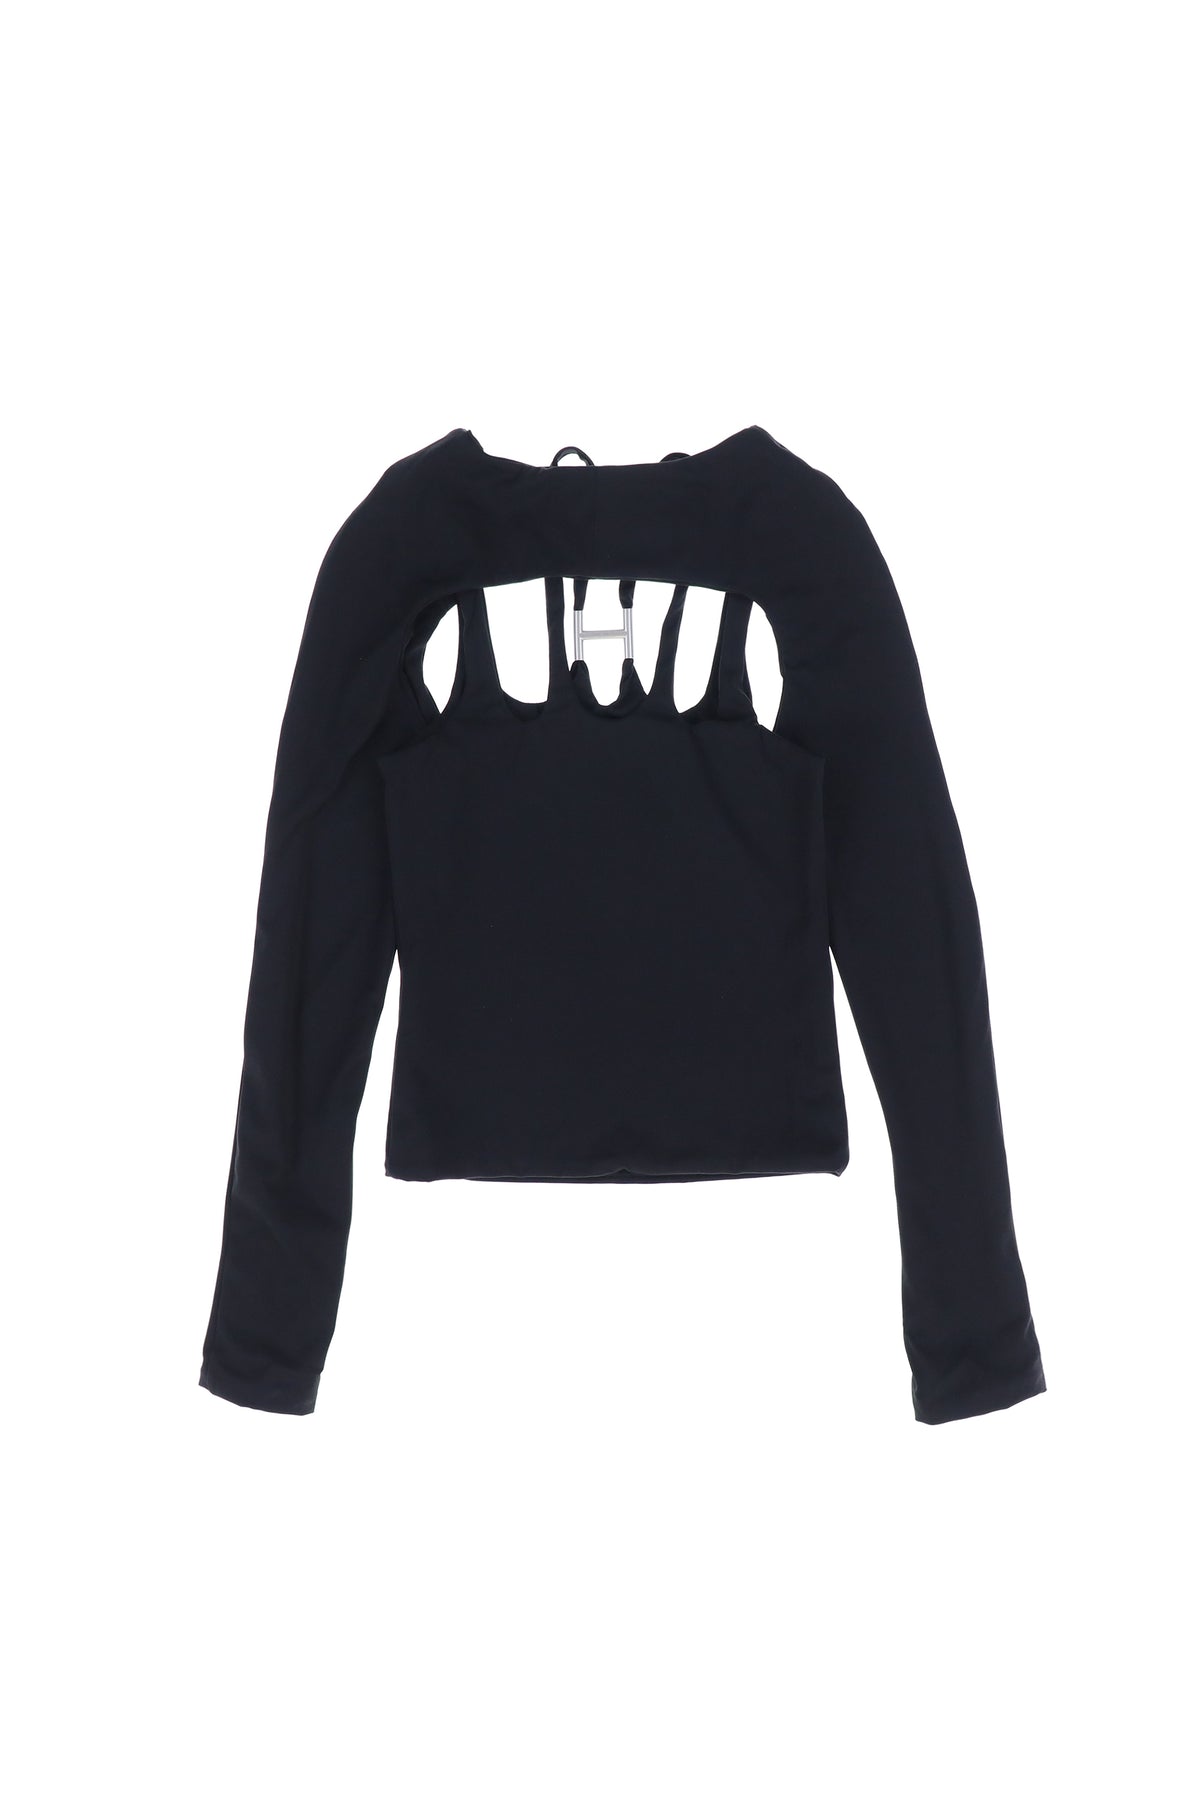 FORGED LONG SLEEVE TOP / BLK